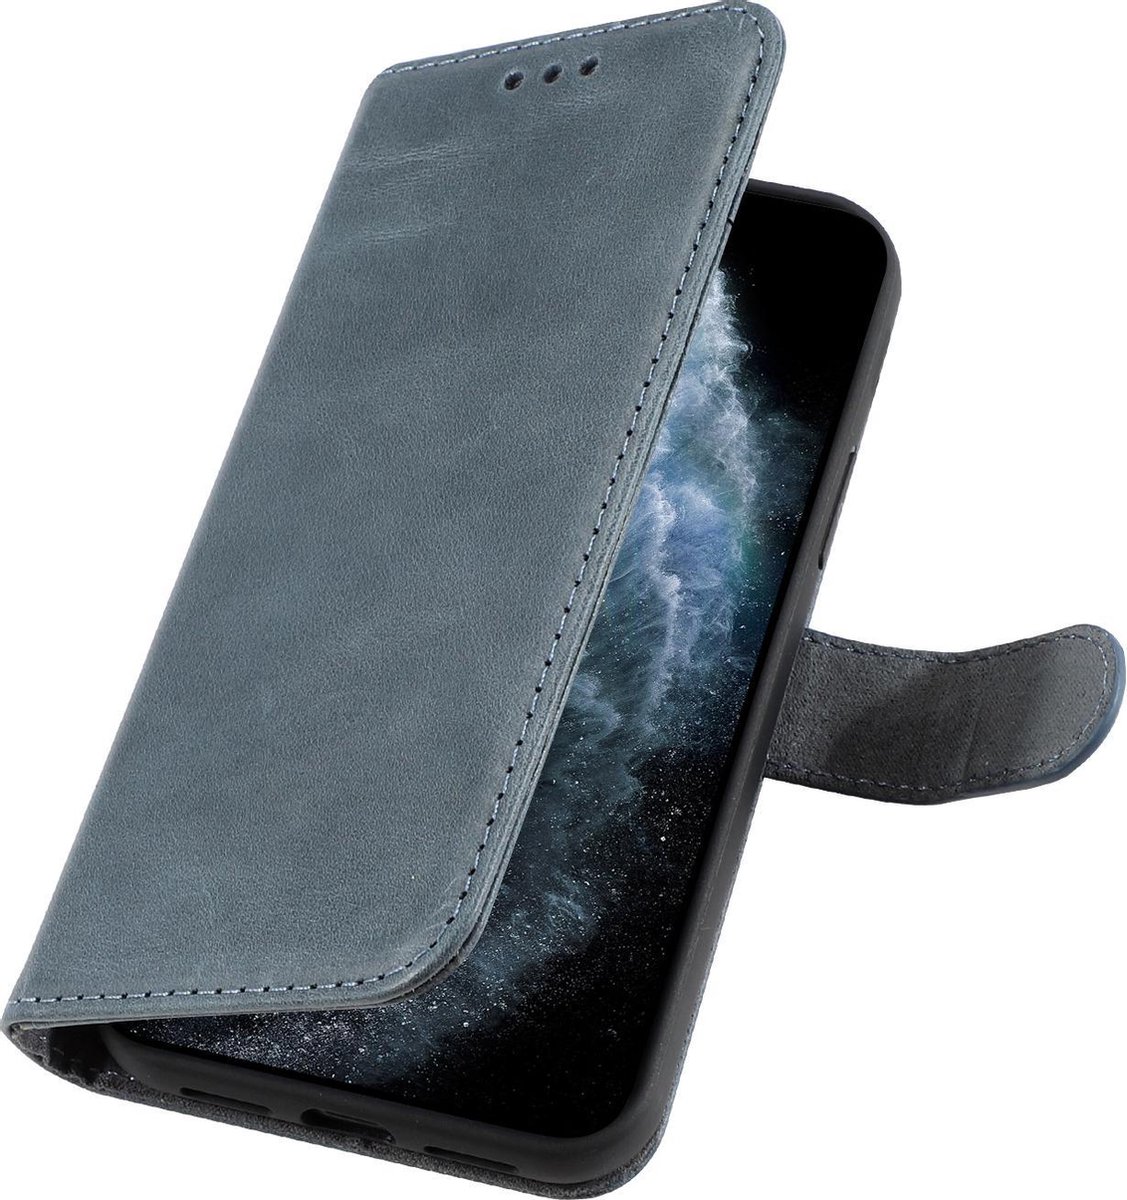 DiLedro - iPhone 12 Pro Max hoesje bookcase - iPhone 12 Pro Max wallet case - hoesje iPhone 12 Pro Max bookcase - echt Leer - iPhone 12 Pro Max Echt Lederen Bookcase RFID - Navy Blue